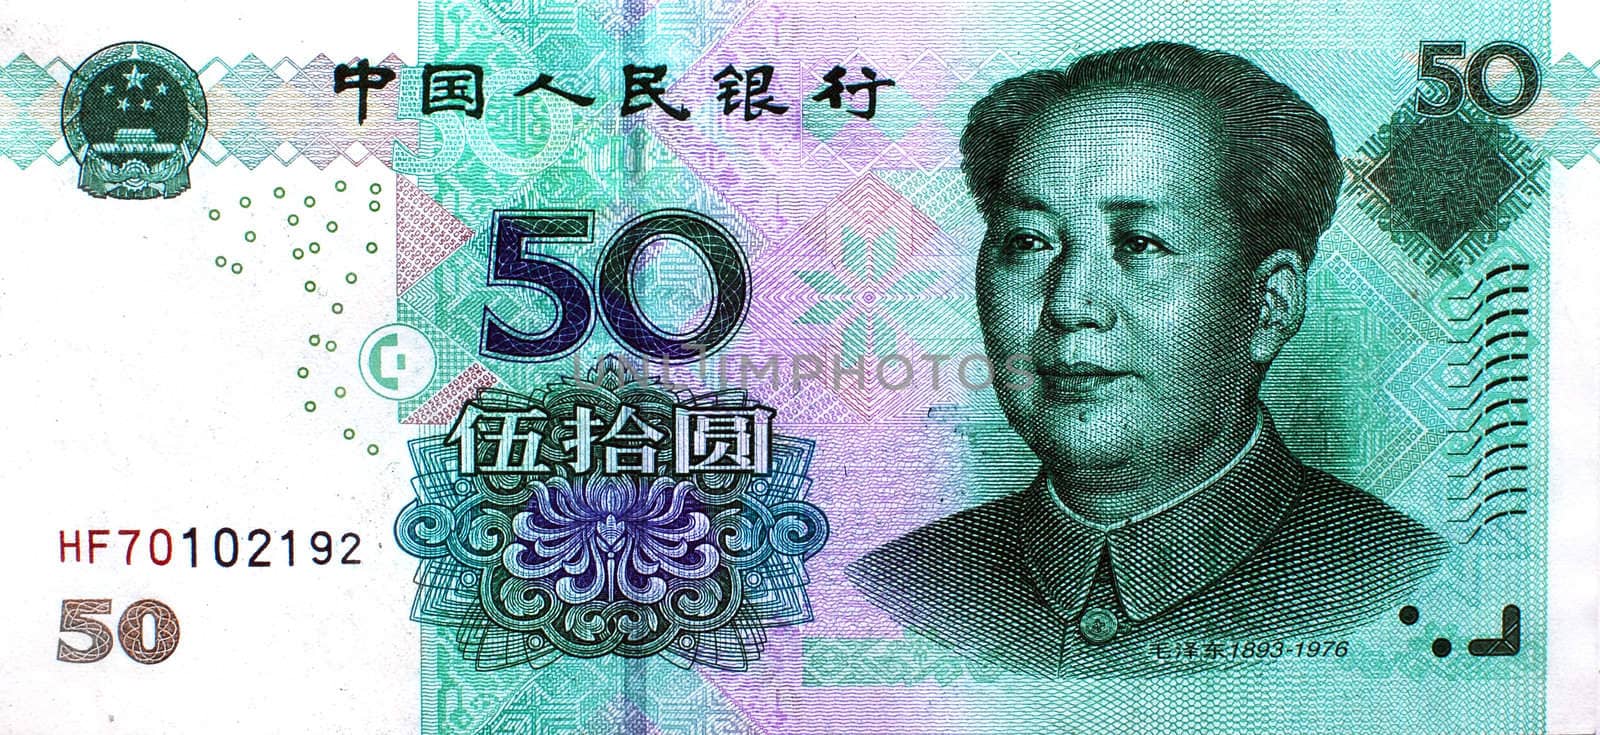 Fifty Yuan banknote by Vectorex